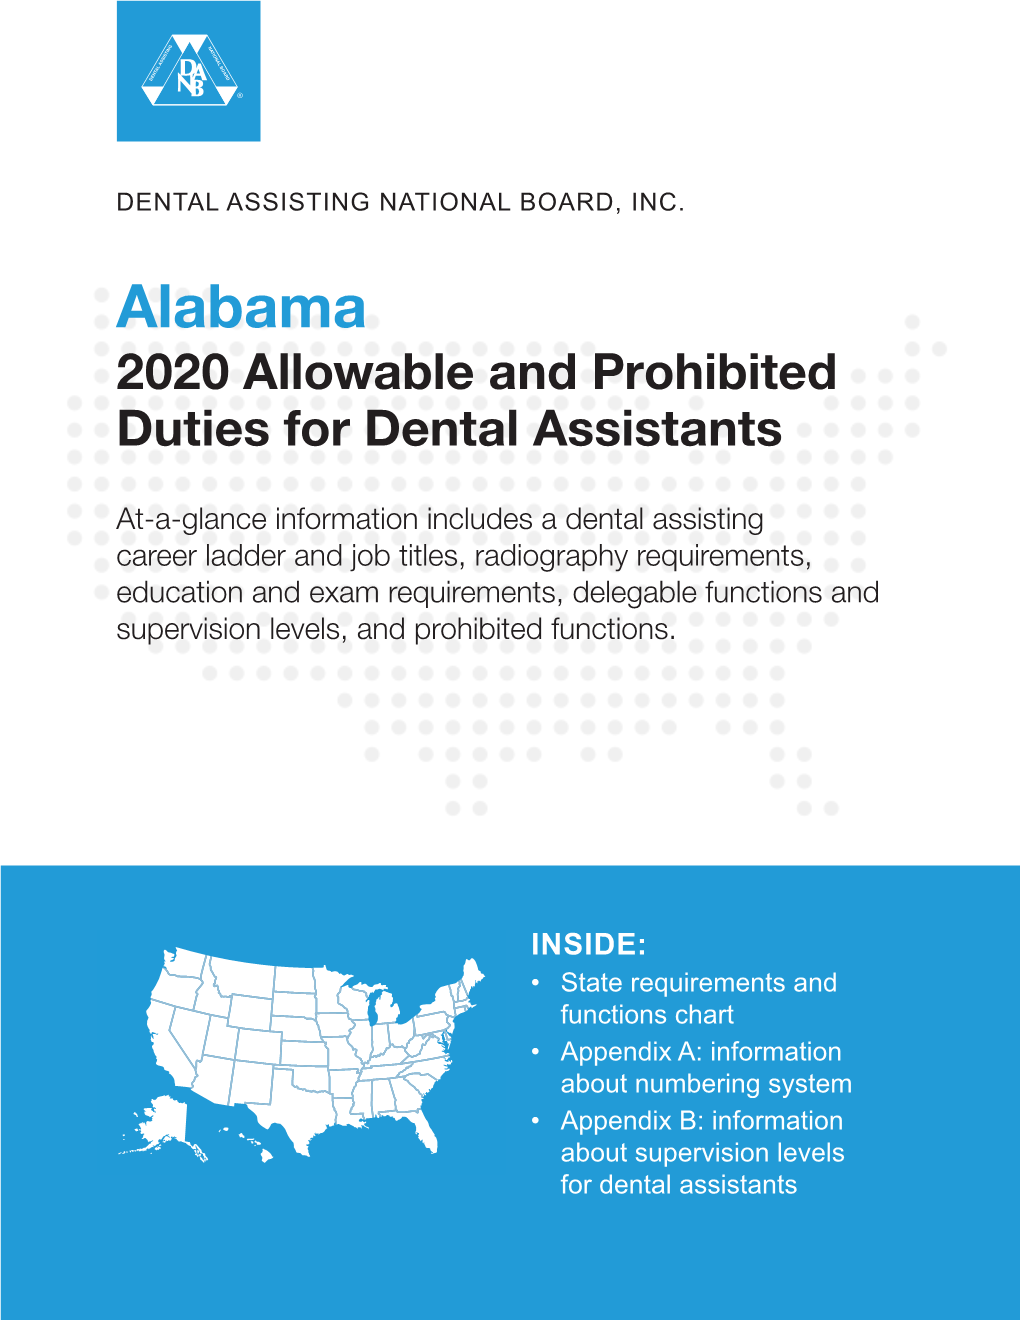 Alabama 2020 Allowable and Prohibited Duties for Dental Assistants